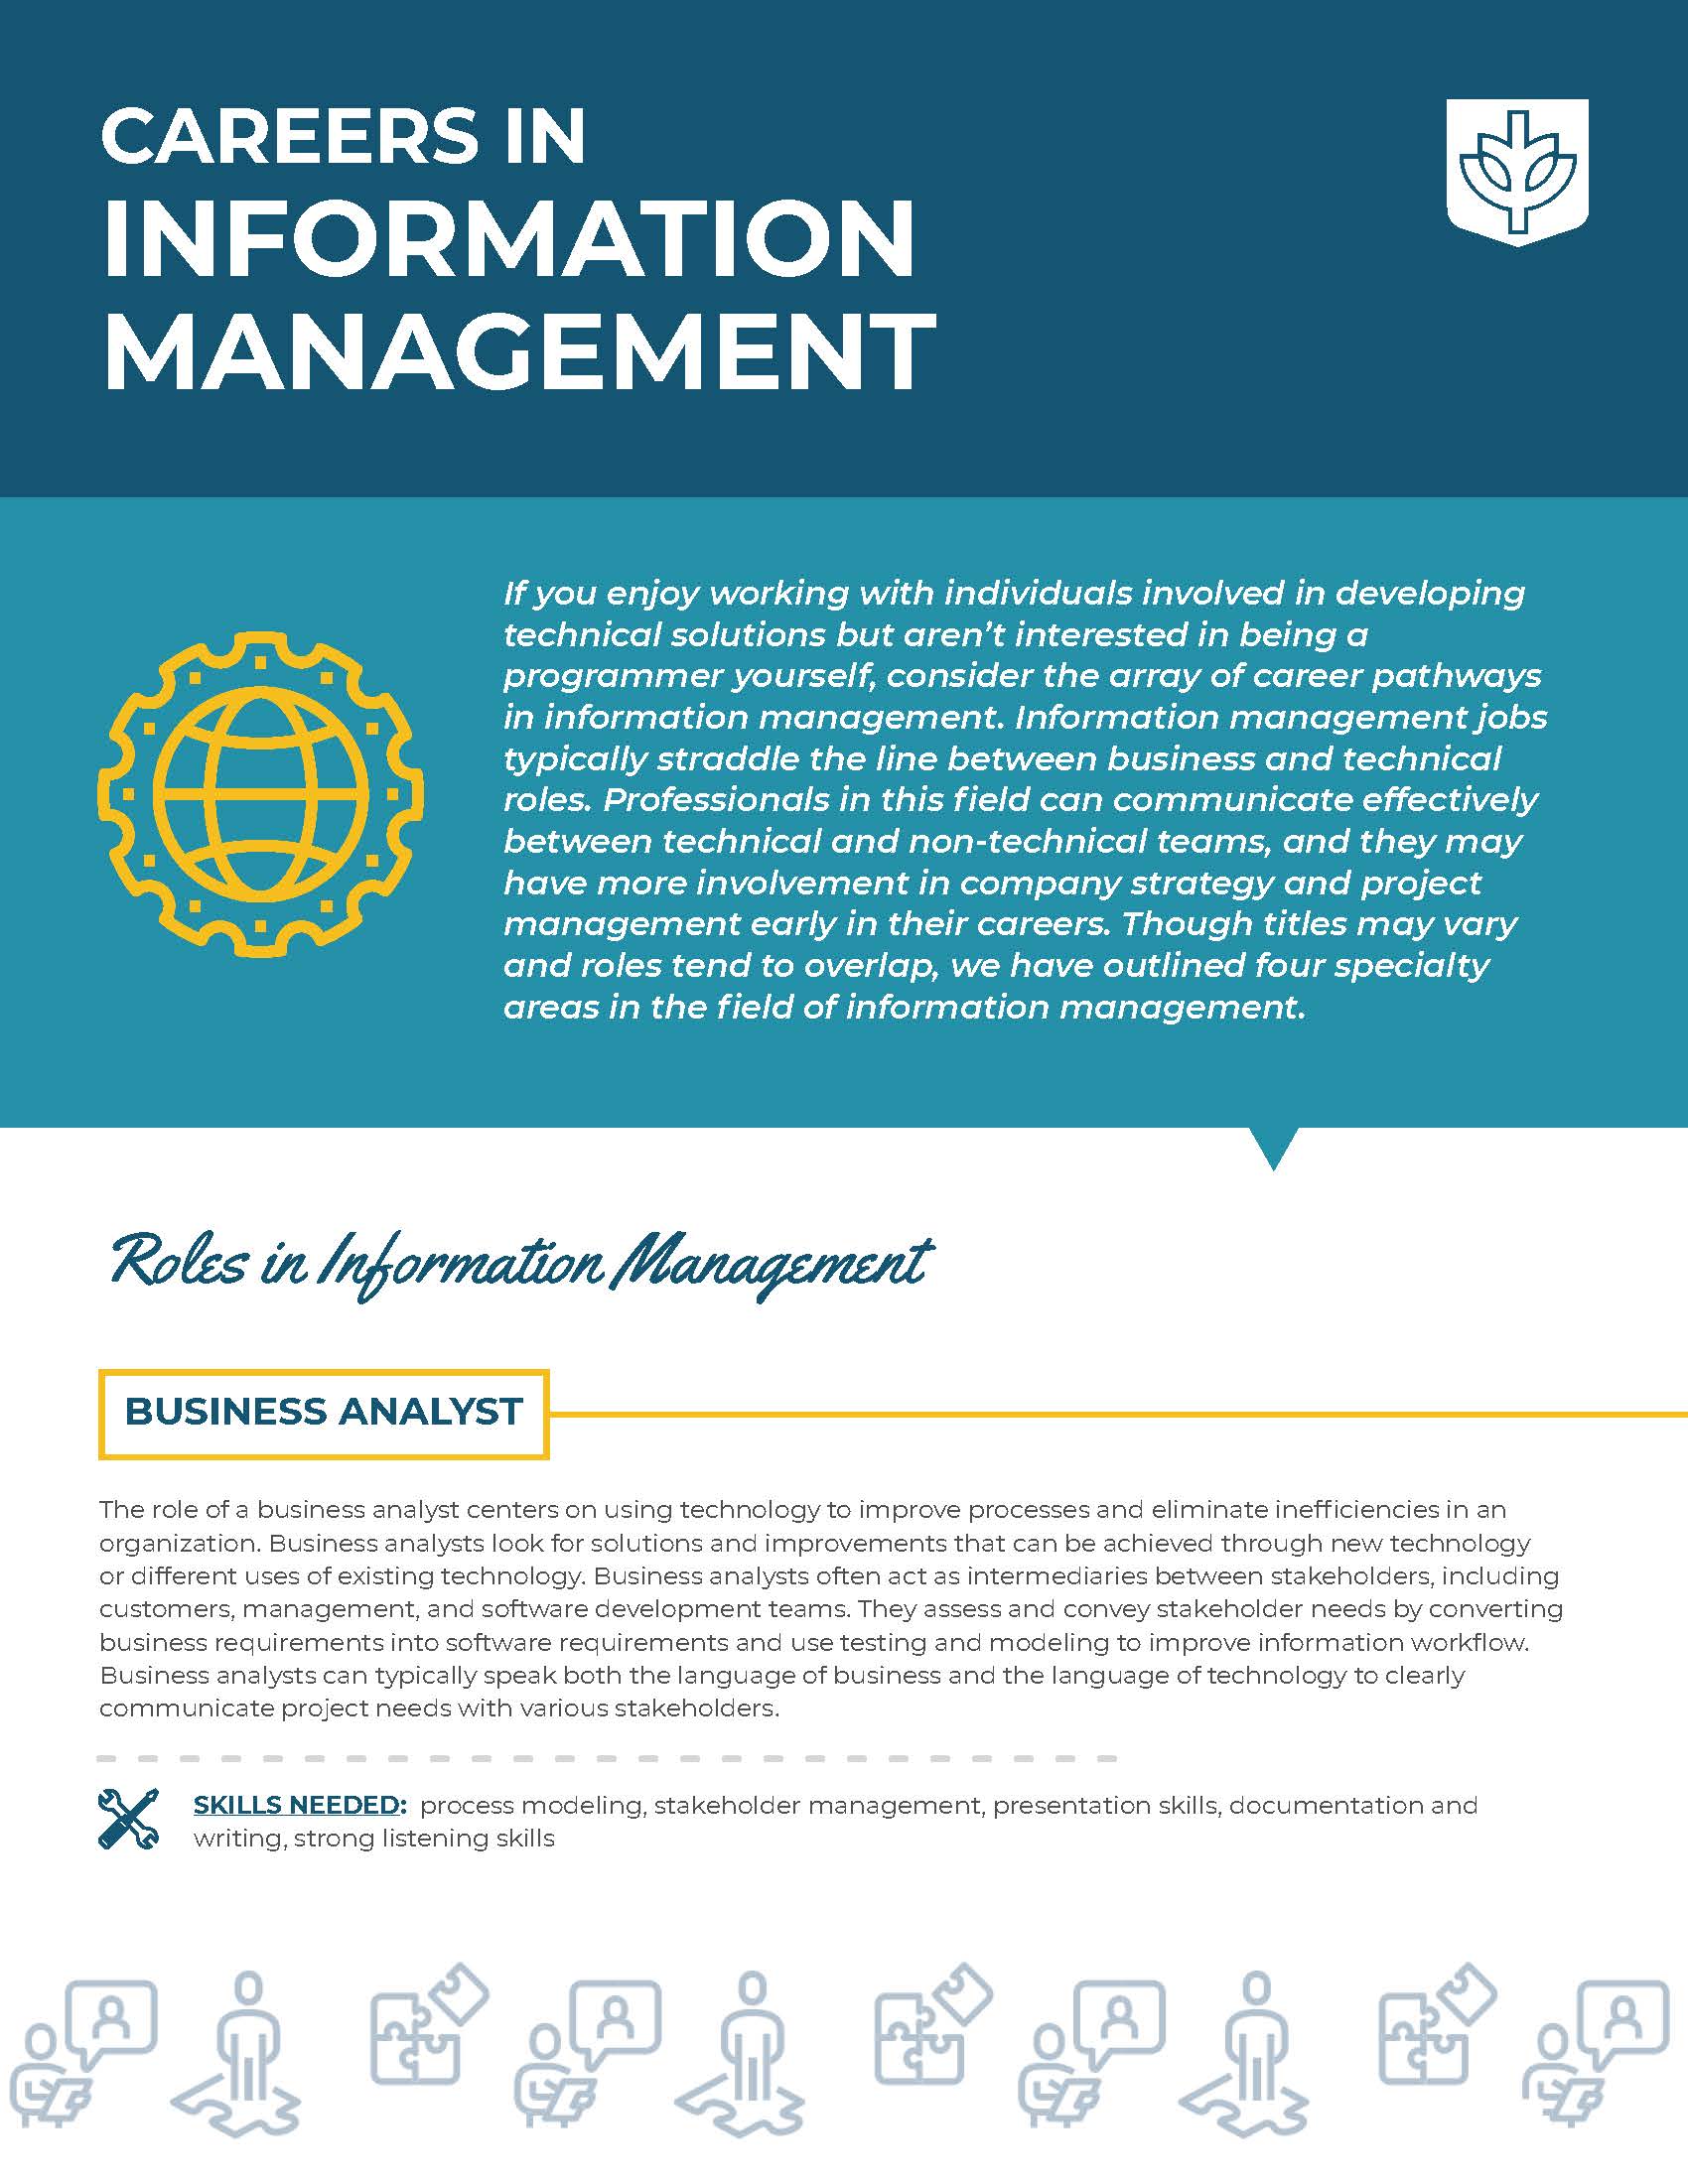 Careers in Information Management